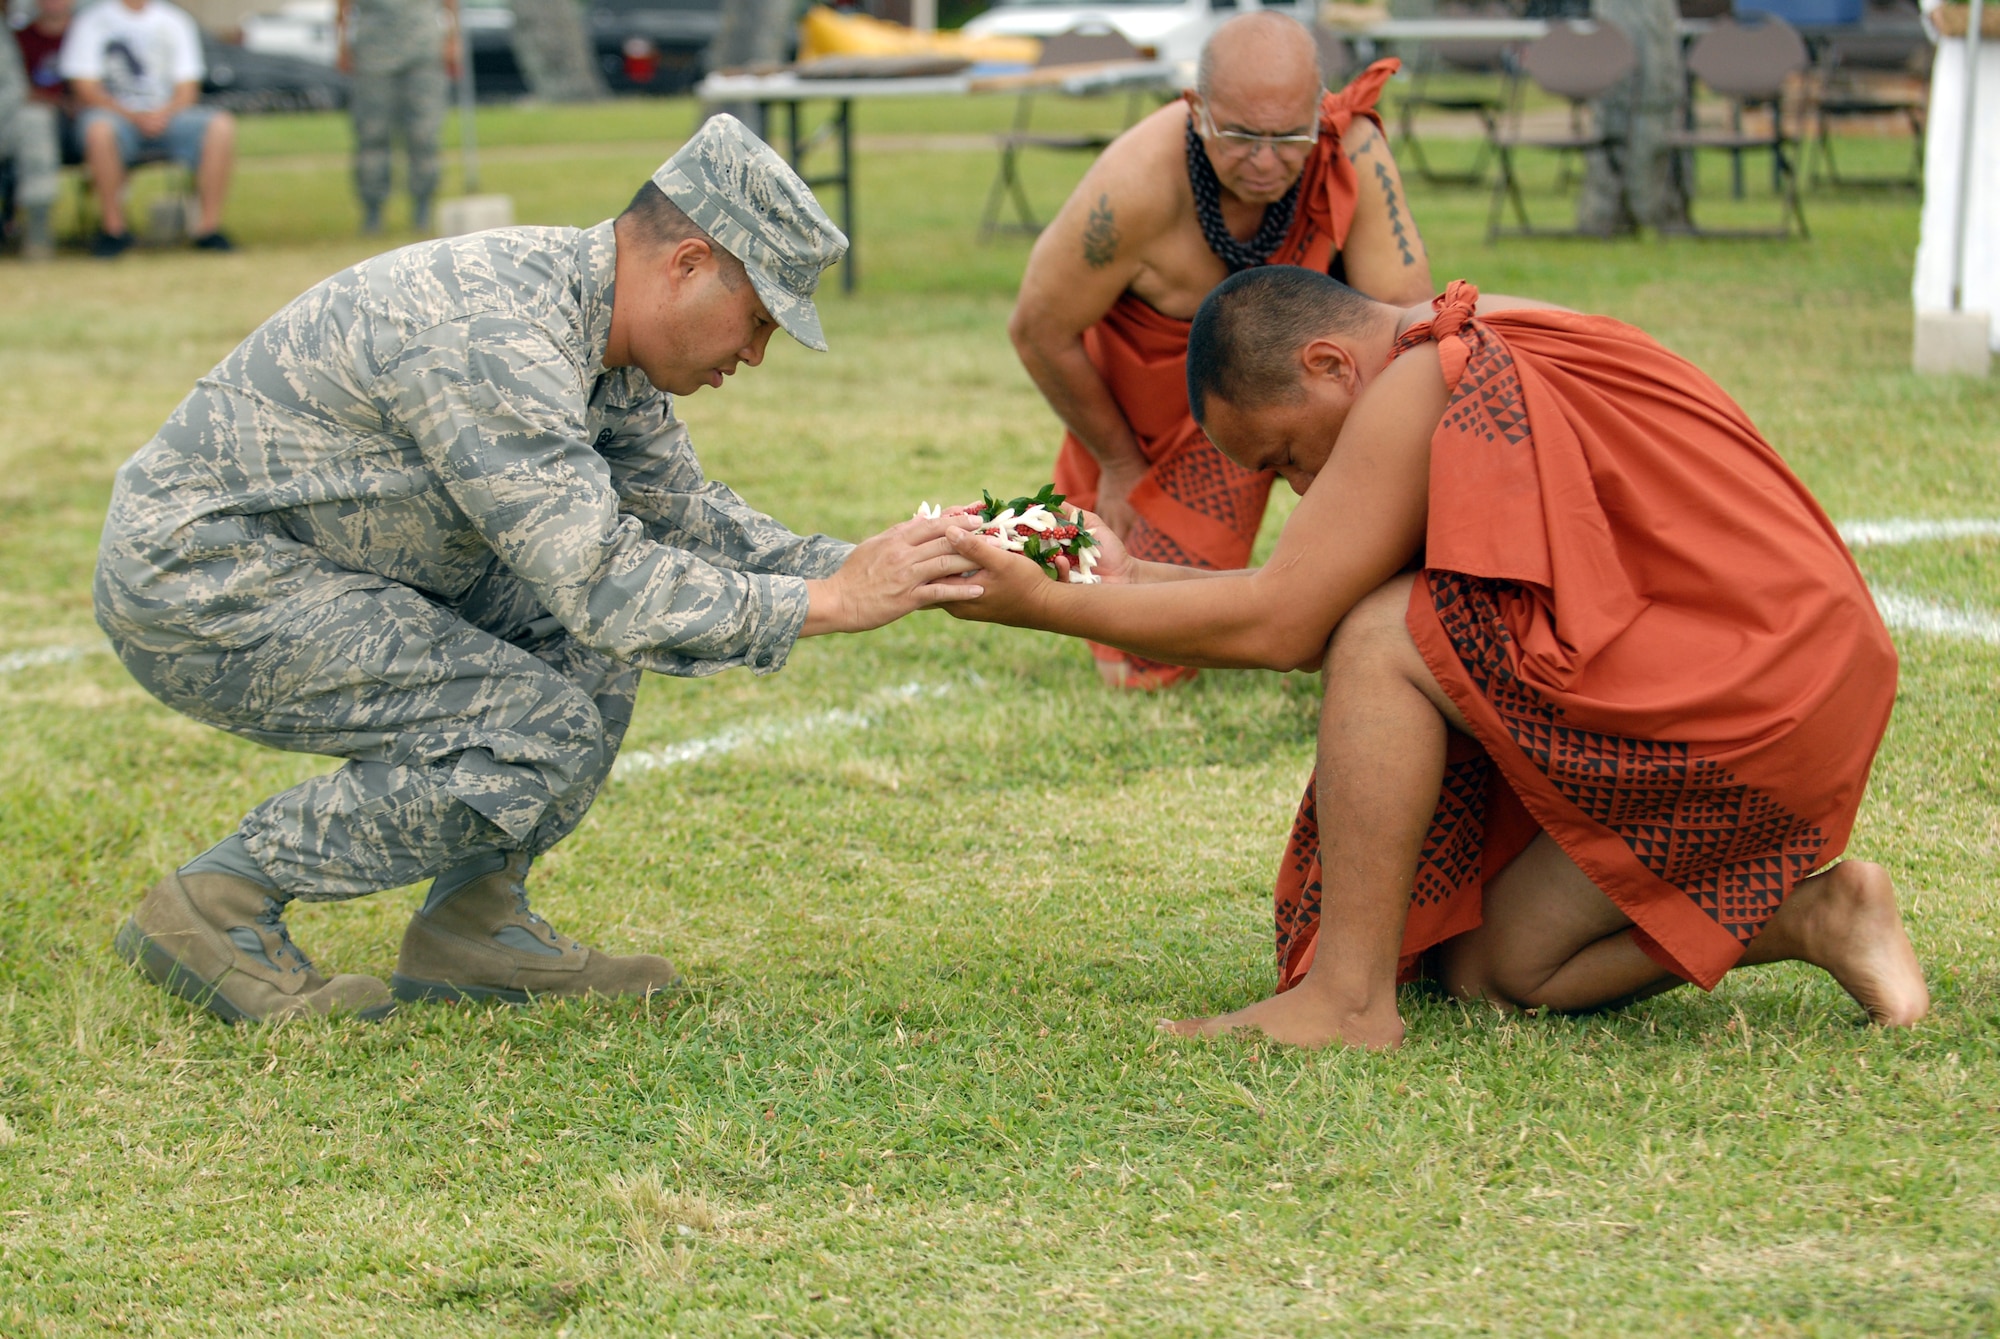 HICKAM AIR FORCE BASE, Hawaii -- Colonel Giovanni Tuck, 15th Airlift Wing commander, offers a gift during the Makahiki Festival here, Nov. 14. For more than two-thousand years, the significance of Lono and his contributions to the beliefs and practices of the early Hawaiian people, influenced the celebration of events held during the Makahiki Festival throughout the Hawaiian Islands. Since Lono was the embodiment of all the characteristics of peace and welfare, all warfare was strictly forbidden during the time of the Makahiki. Since Lono represented the spiritual life-force that came out of all agricultural efforts, much feasting of every kind was done during the four months of the Makahiki. This focus on health and welfare made games of skill that tested a healthy body and mind a focal point of the Makahiki games. (U.S. Air Force photo/Senior Airman Gustavo Gonzalez)